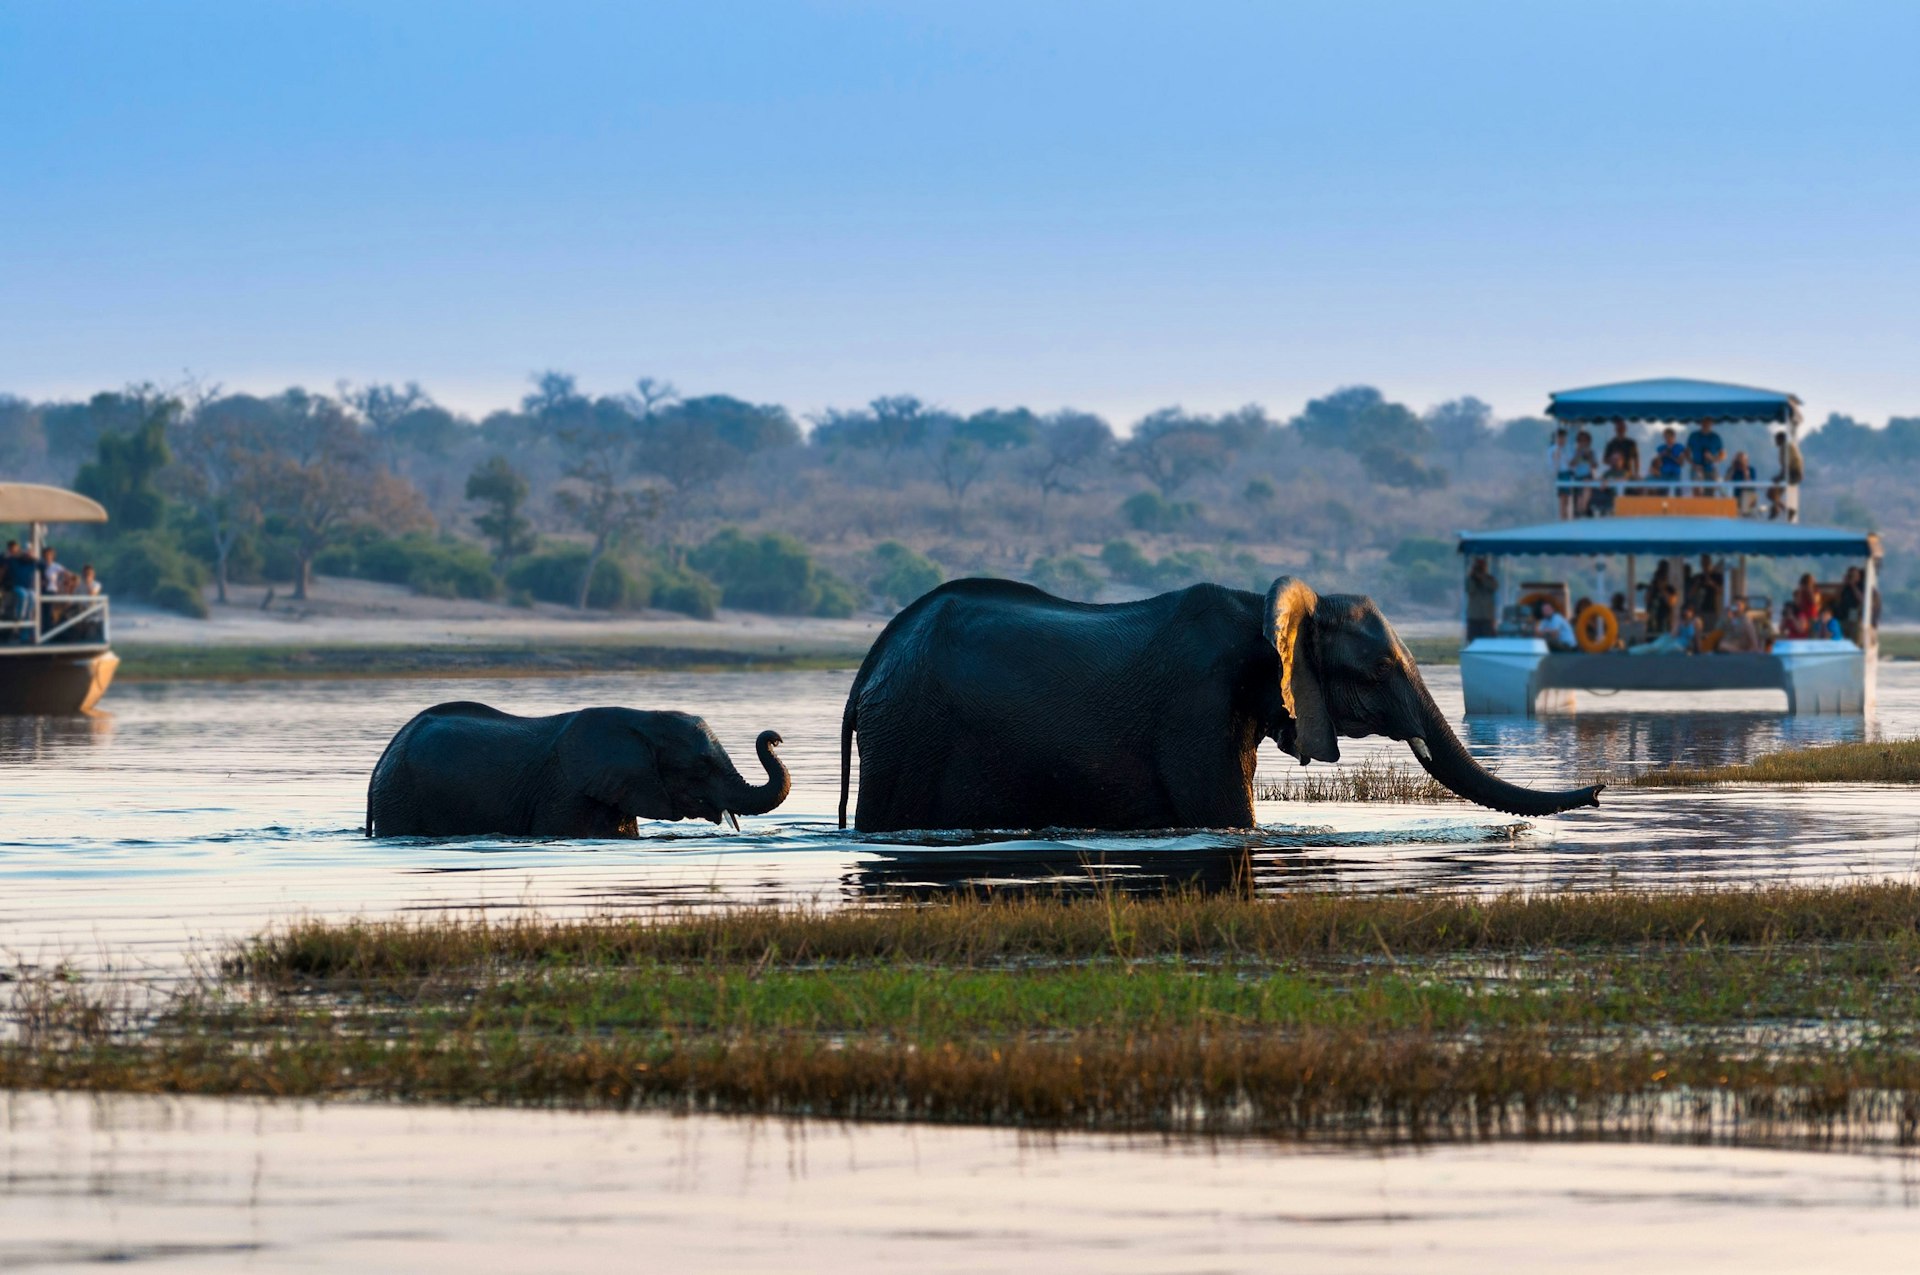 A mother elephant and calf wade through the Chobe River, with two double-decker safari boats watching from a distance.